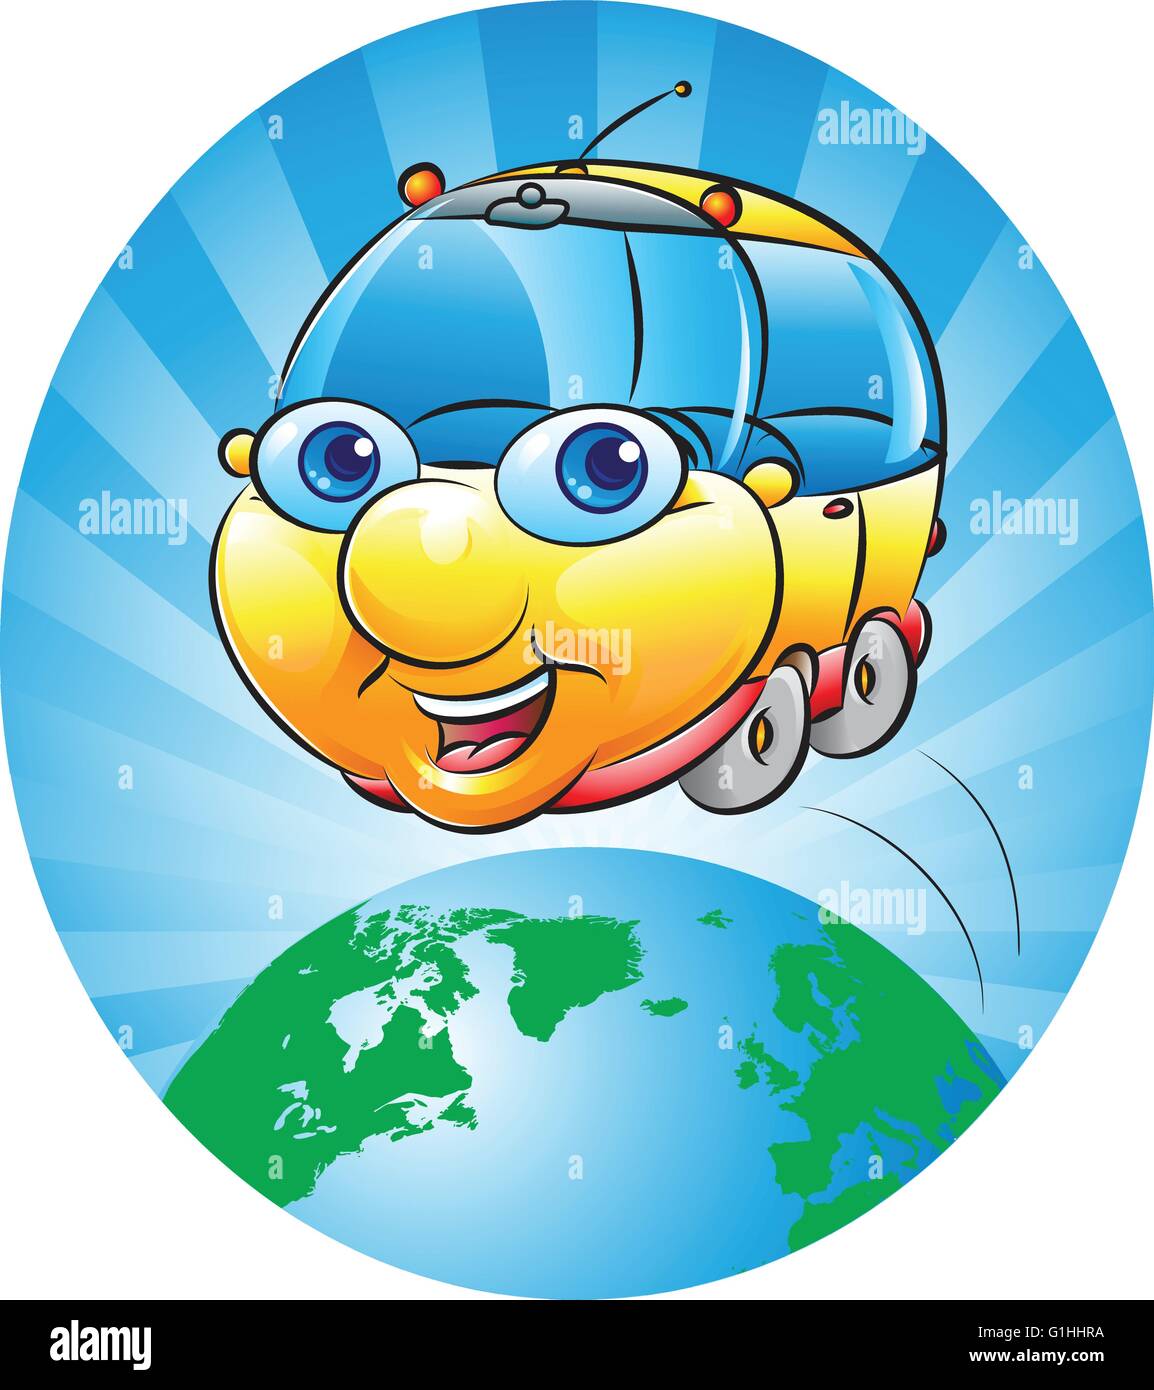 vector illustration of a chubby car around the earth globe The source of the map used for reference: https://www.cia.gov/library Stock Vector